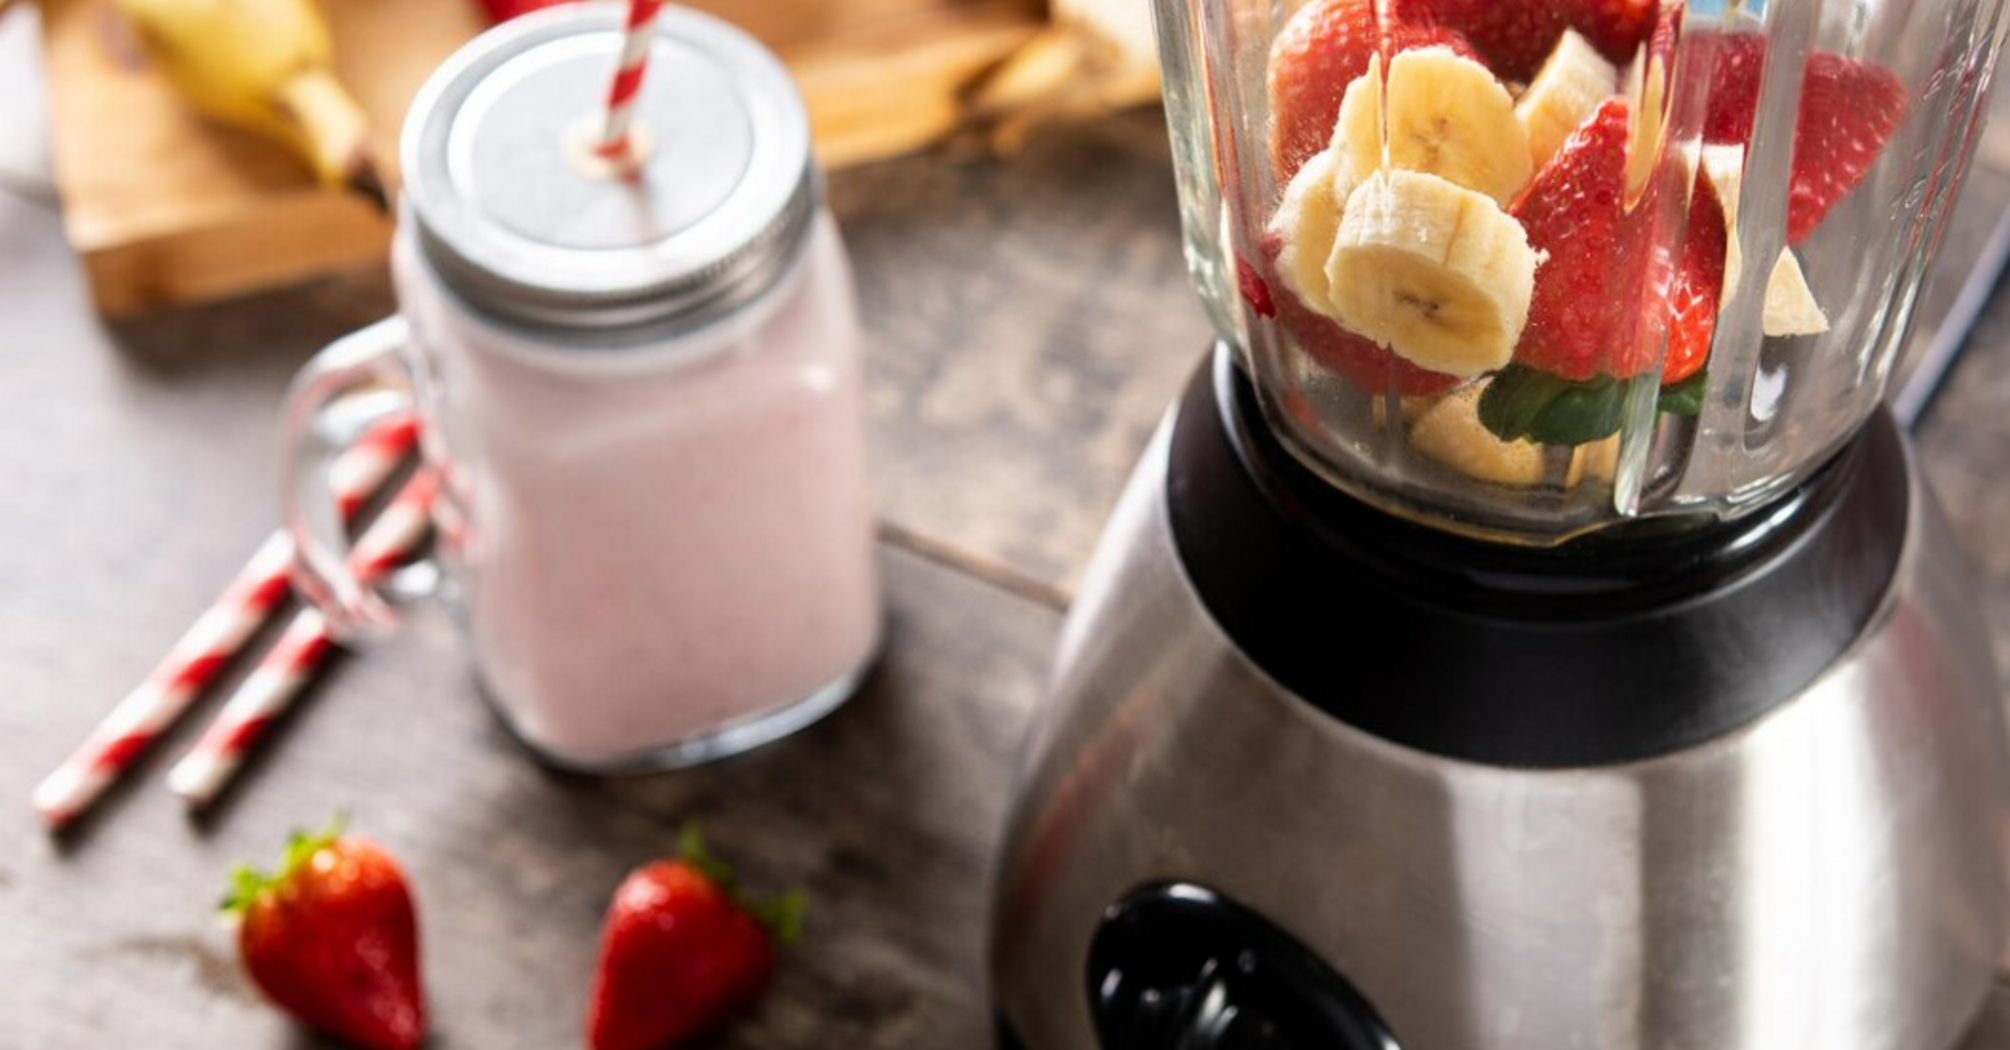 A simple method to clean even the dirtiest blender bowl: no dirt, no odor